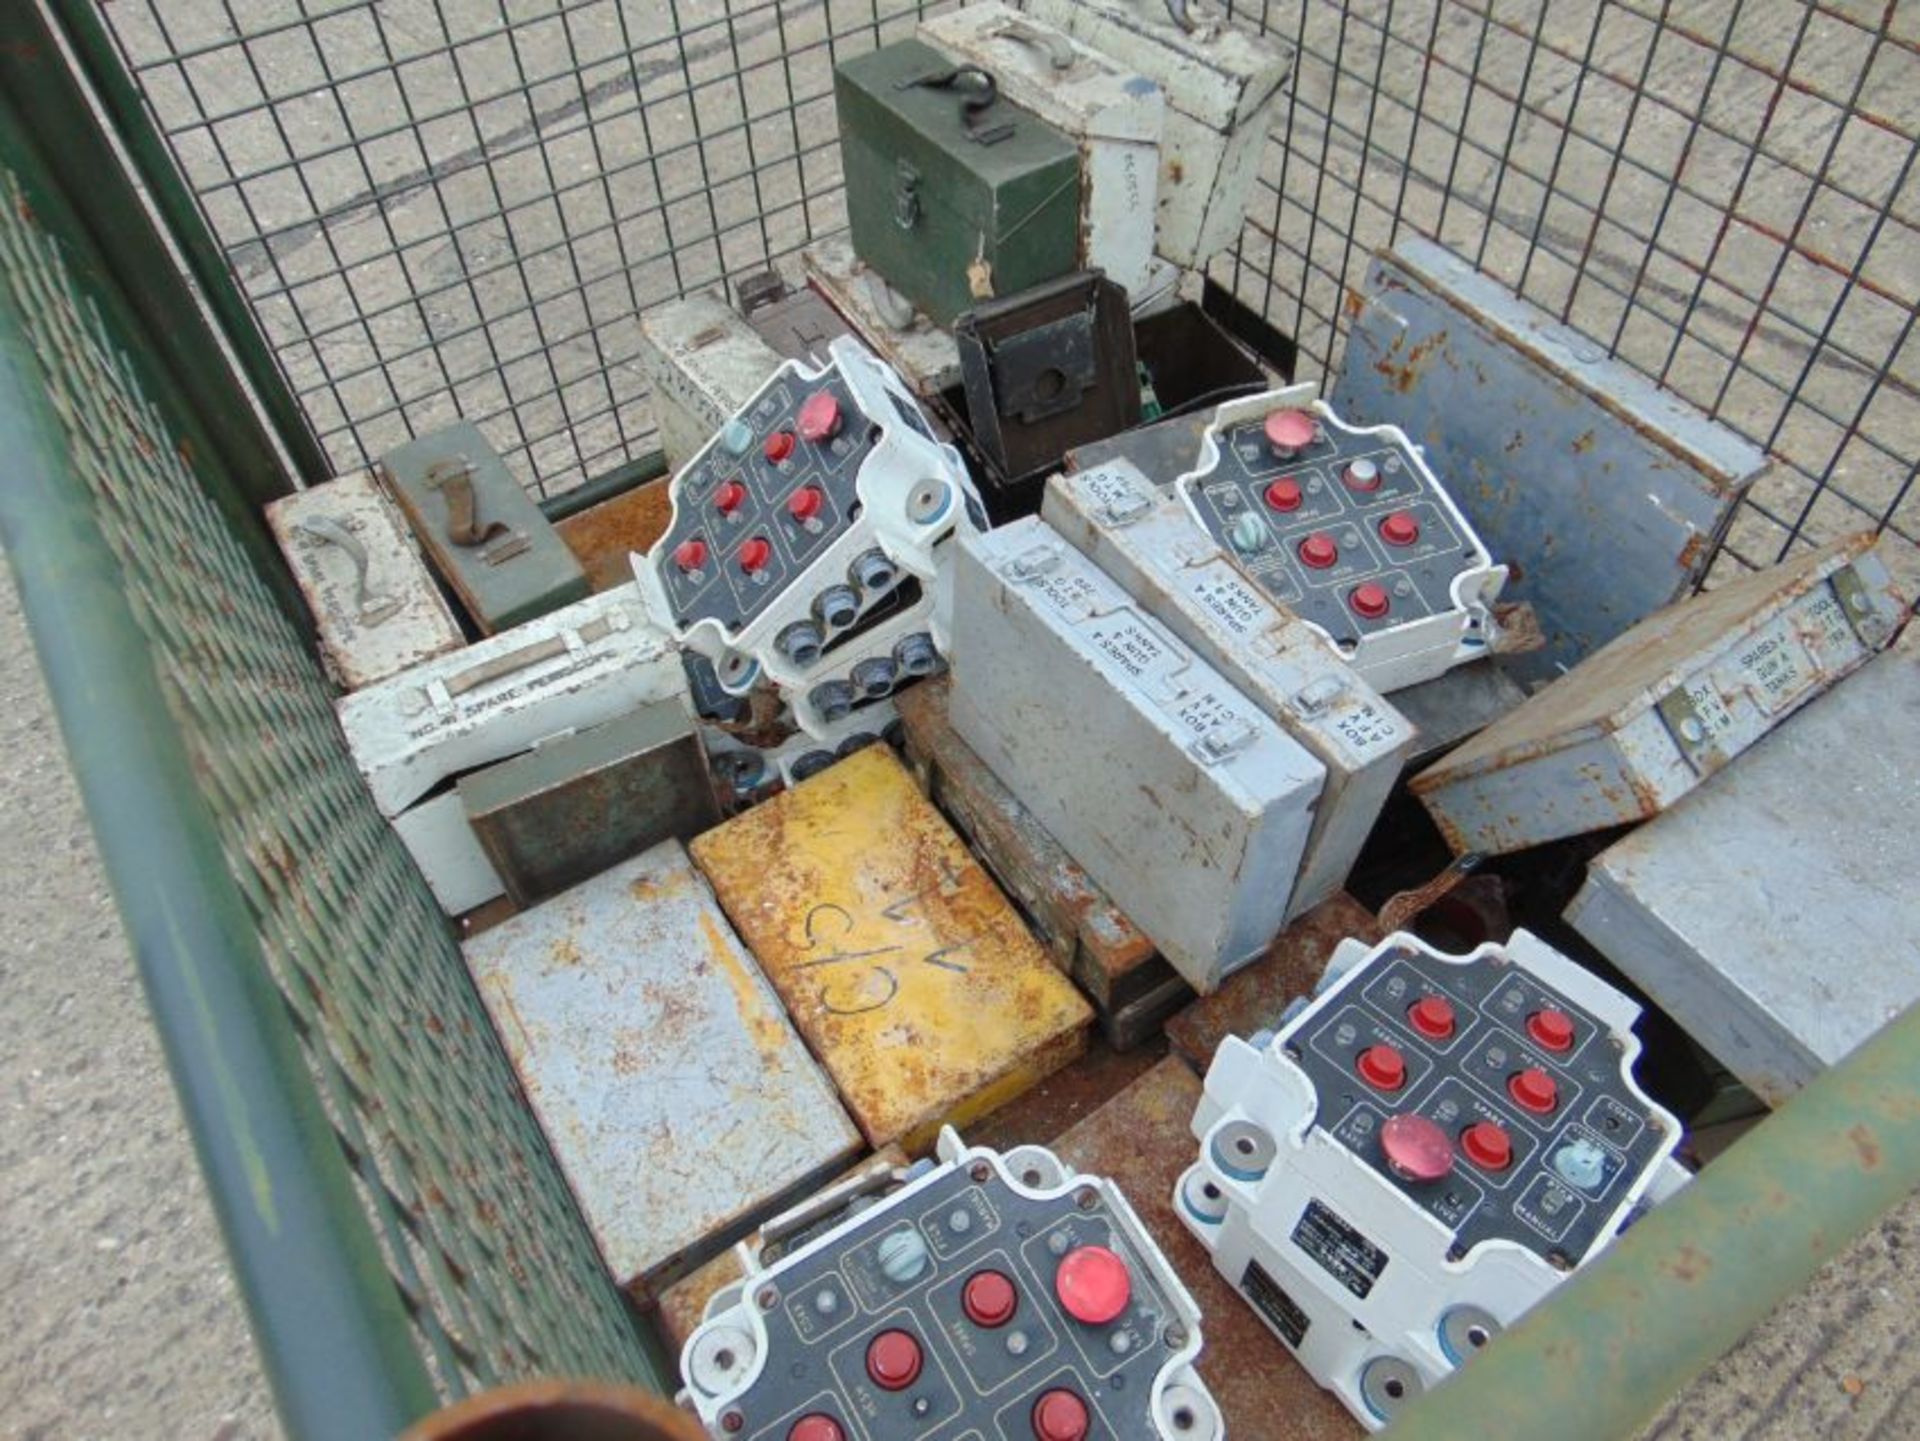 1x Stillage of Control Boxes Gun Spare Boxes, Periscope boxes etc, 40 items - Image 4 of 5